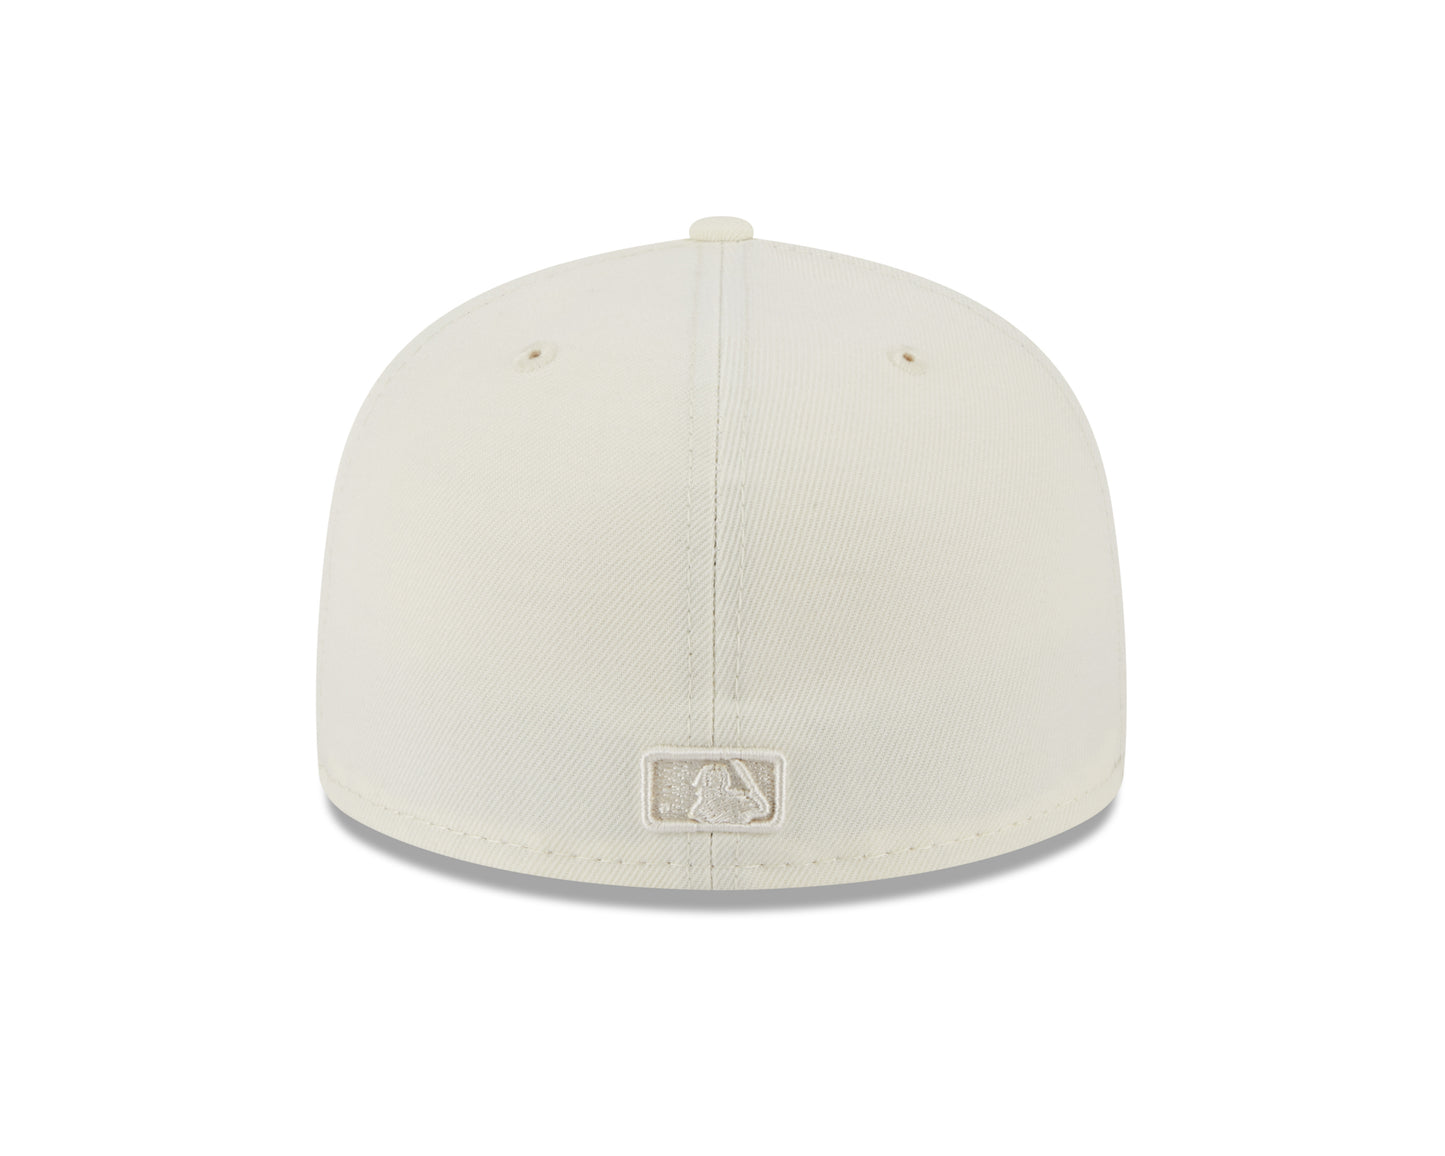 New York Yankees New Era Color Pack Cream 59fifty Fitted Hat- Cream